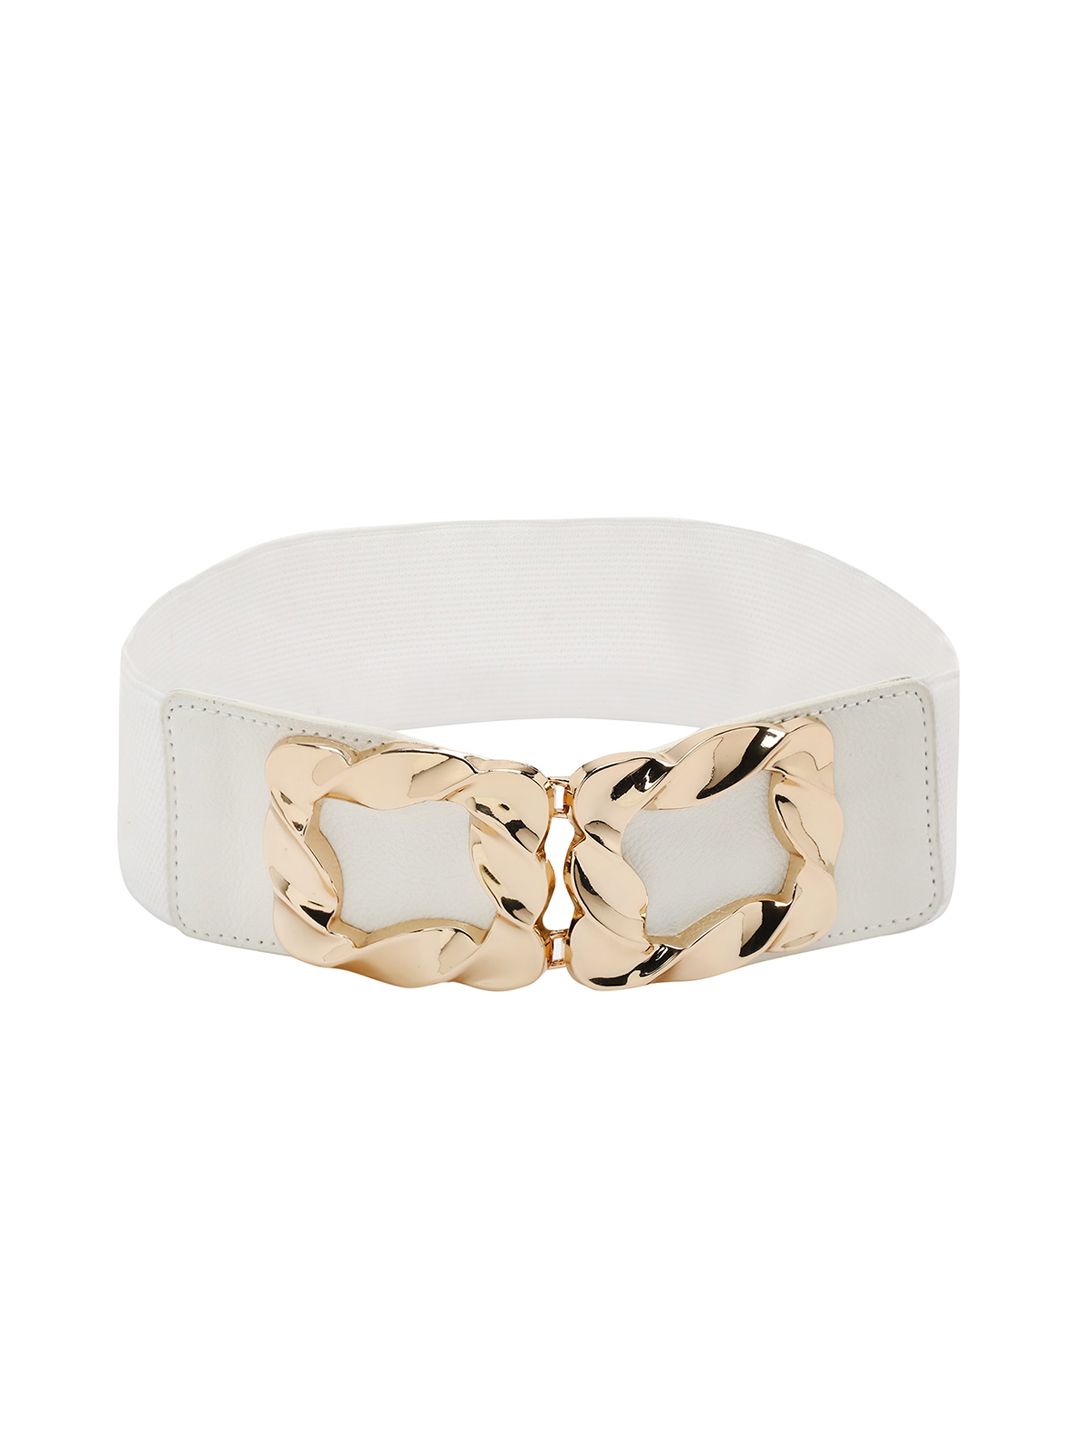 CRUSSET Women White Solid Belt Price in India